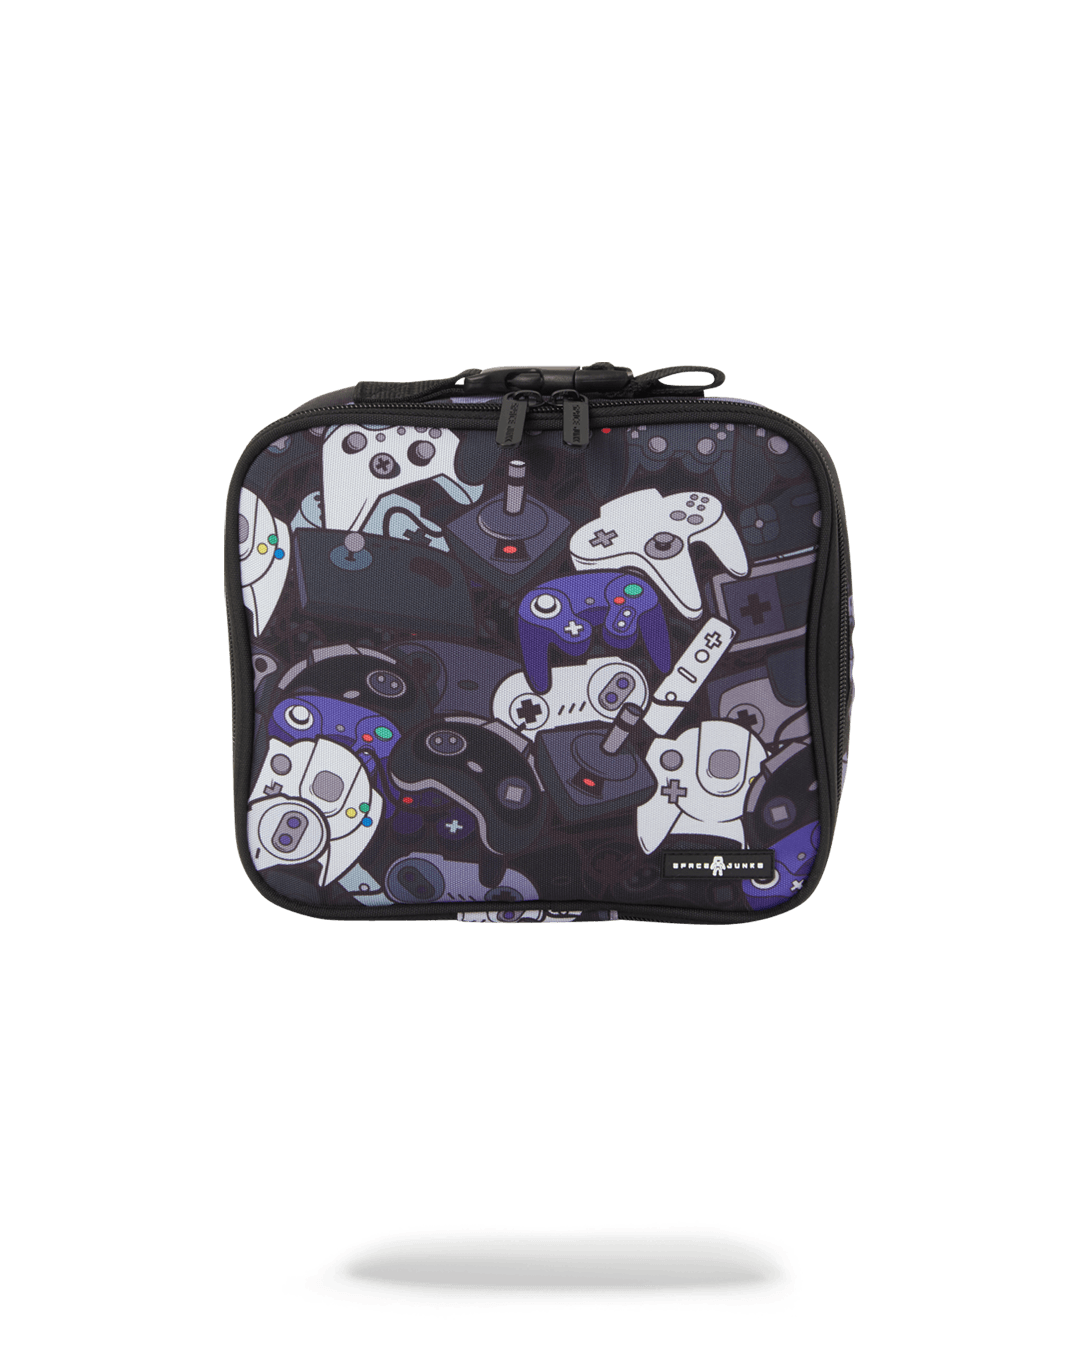 Space Lunch Box – Whiz – USA